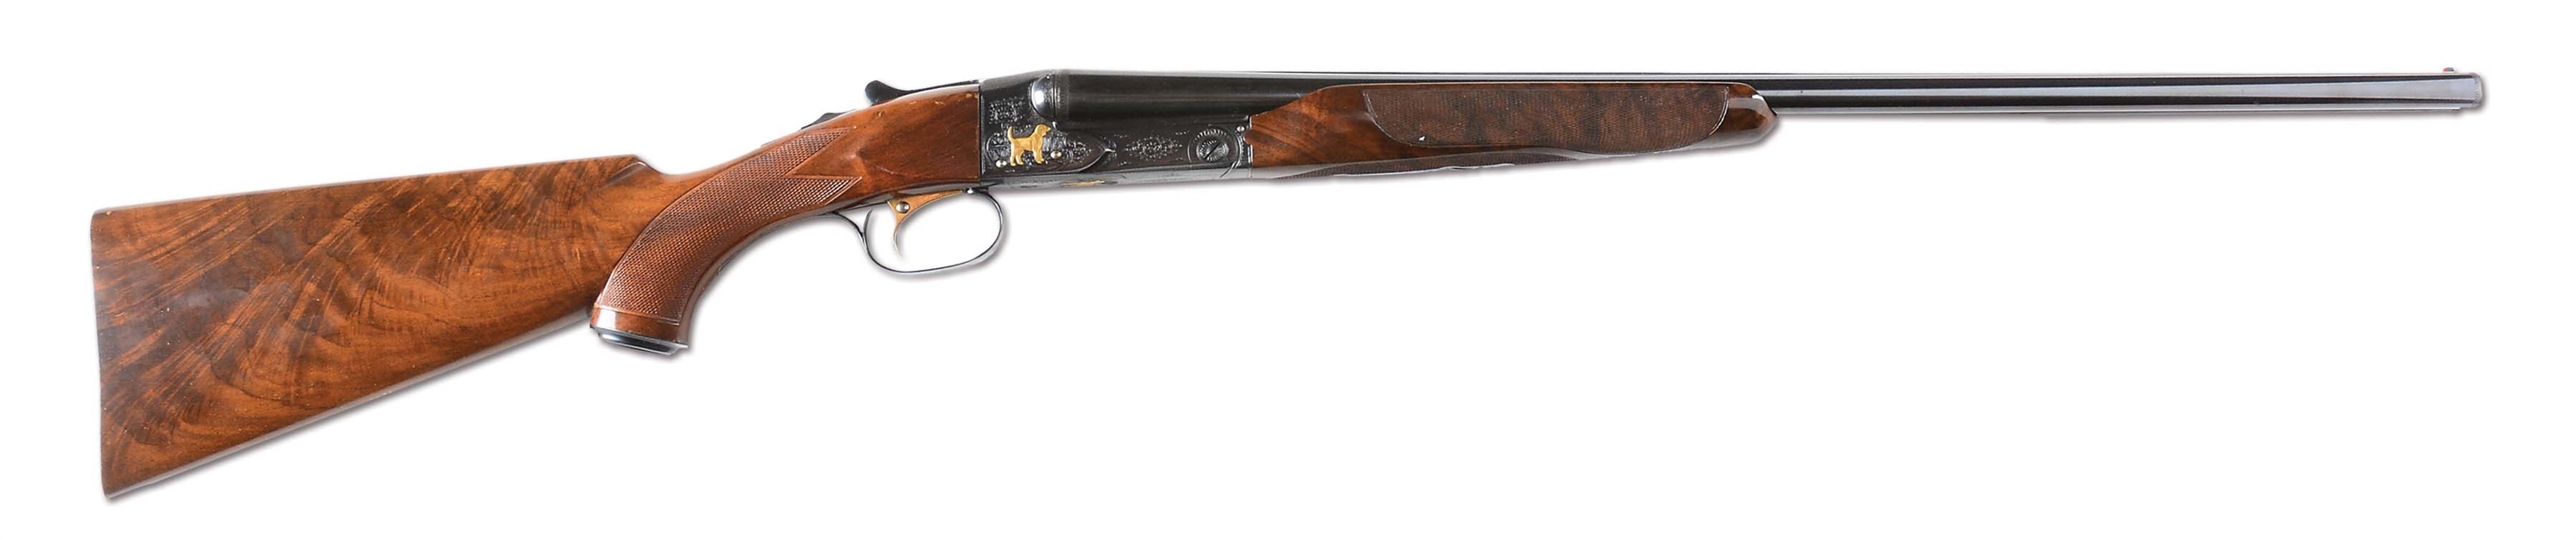 (C) ATTRACTIVE UPGRADED WINCHESTER MODEL 21 SKEET GRADE SHOTGUN ENGRAVED AND GOLD INLAID BY ARNOLD GRIEBEL.